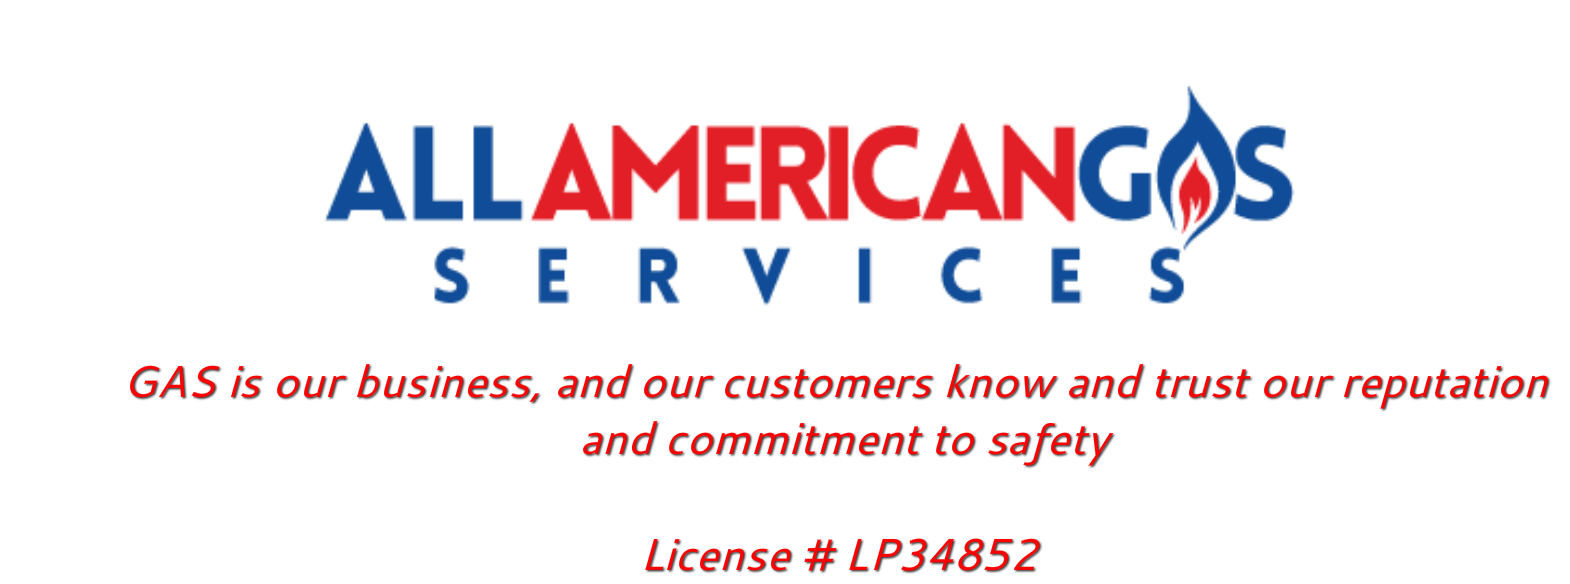 ALL AMERICAN GAS SERVICES